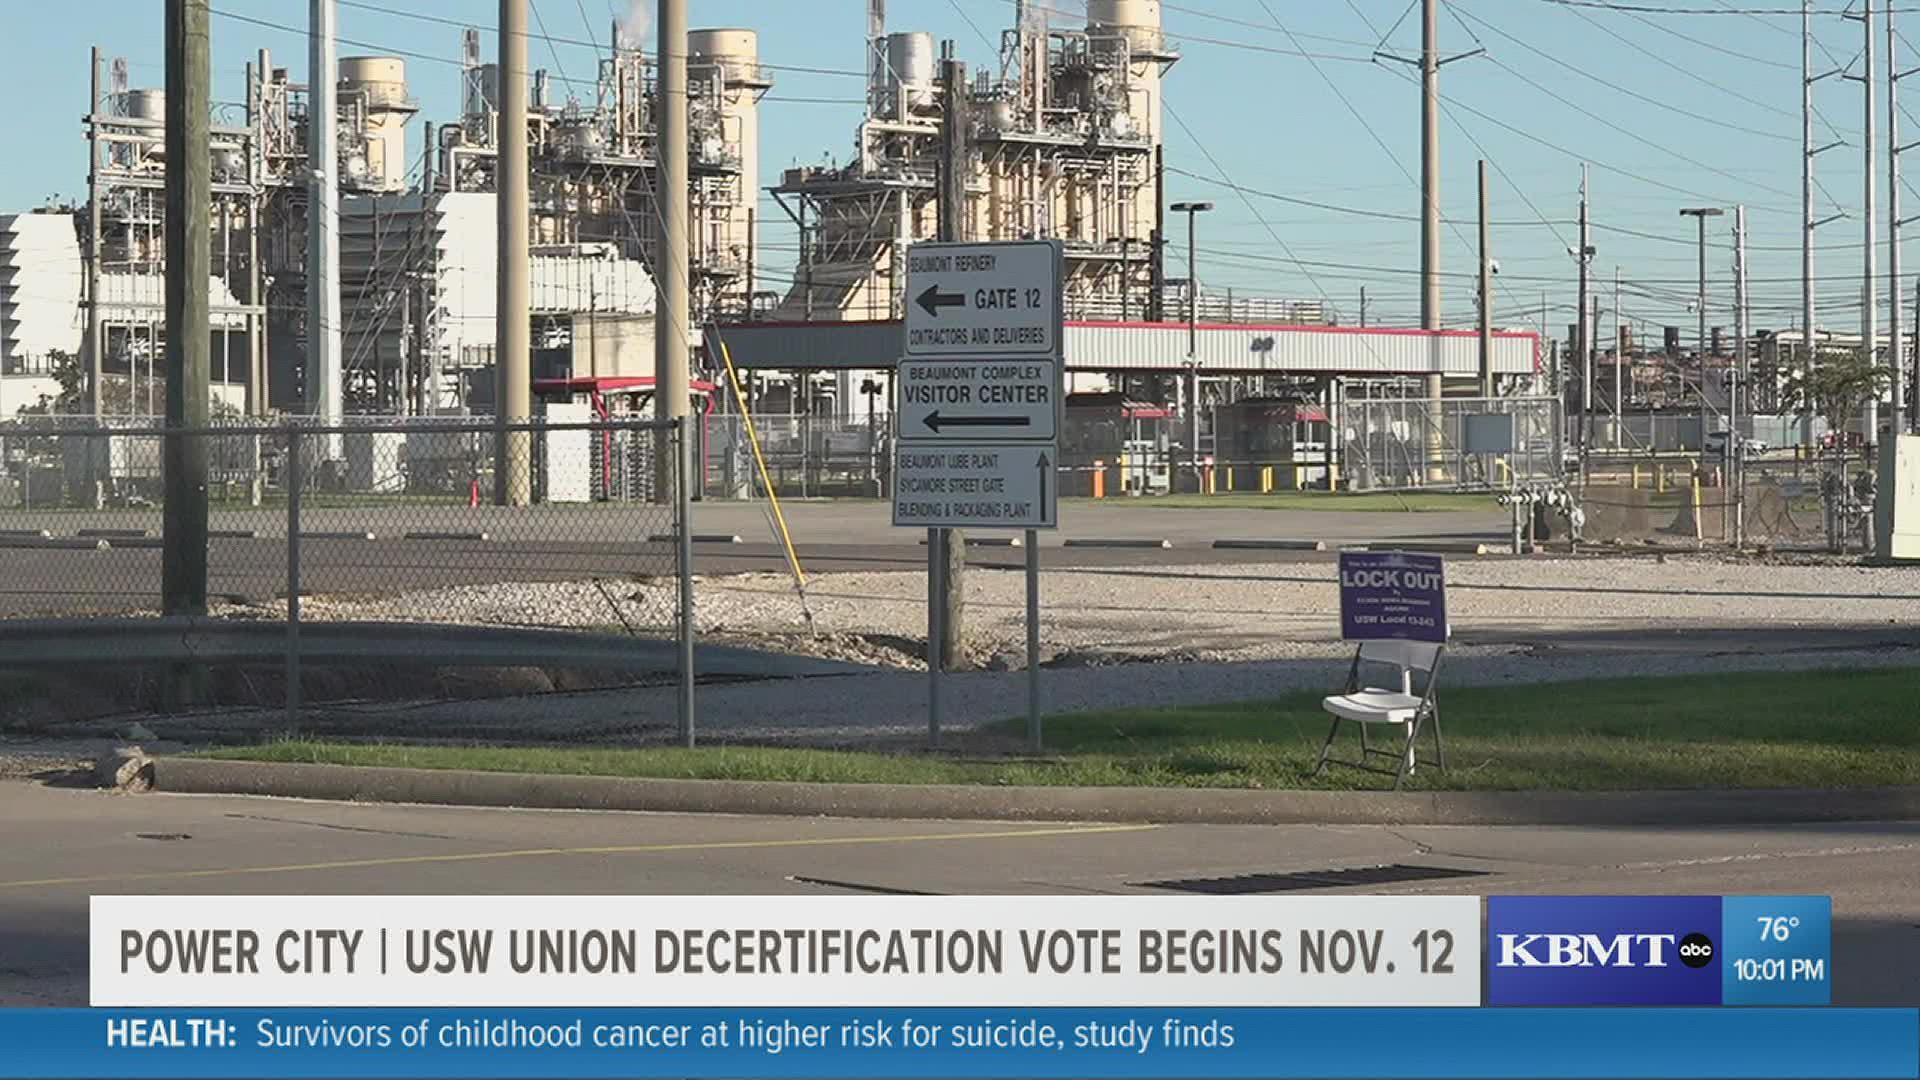 Members of the United Steel Workers union who have been locked of ExxonMobil's Beaumont refinery will vote in early November on whether to decertify the union.